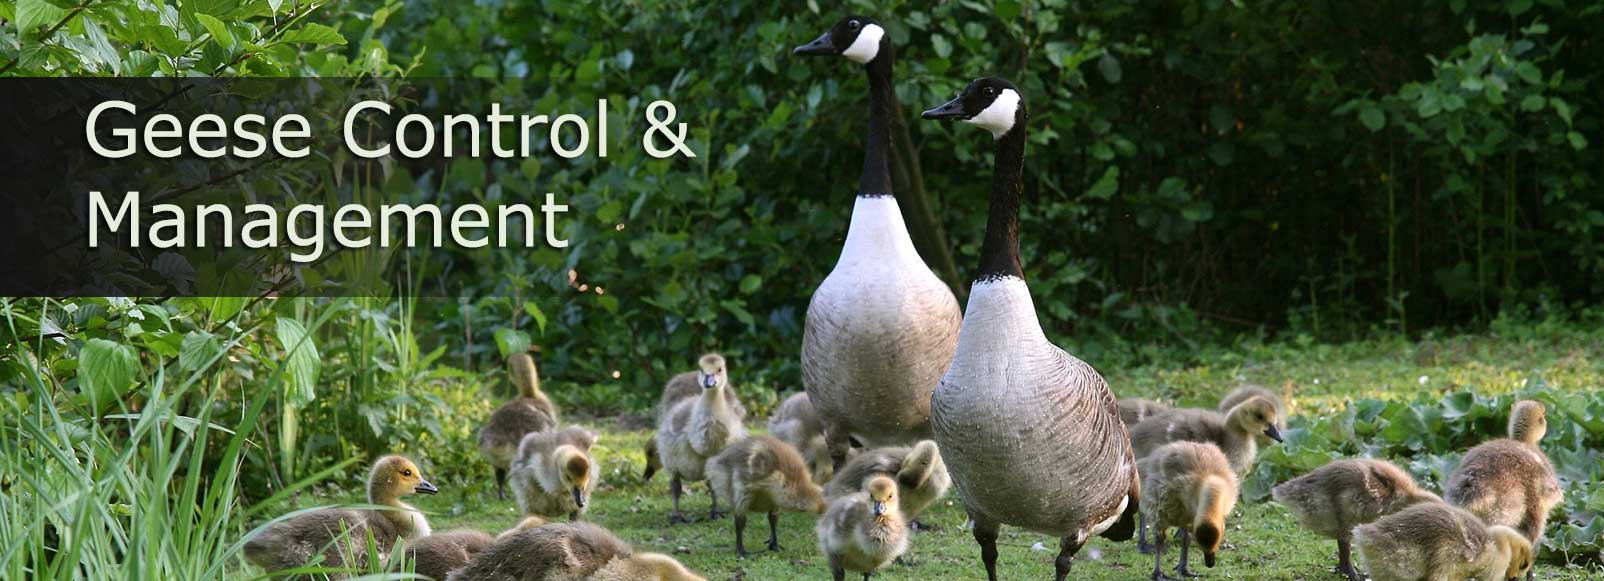 geese control removal toronto